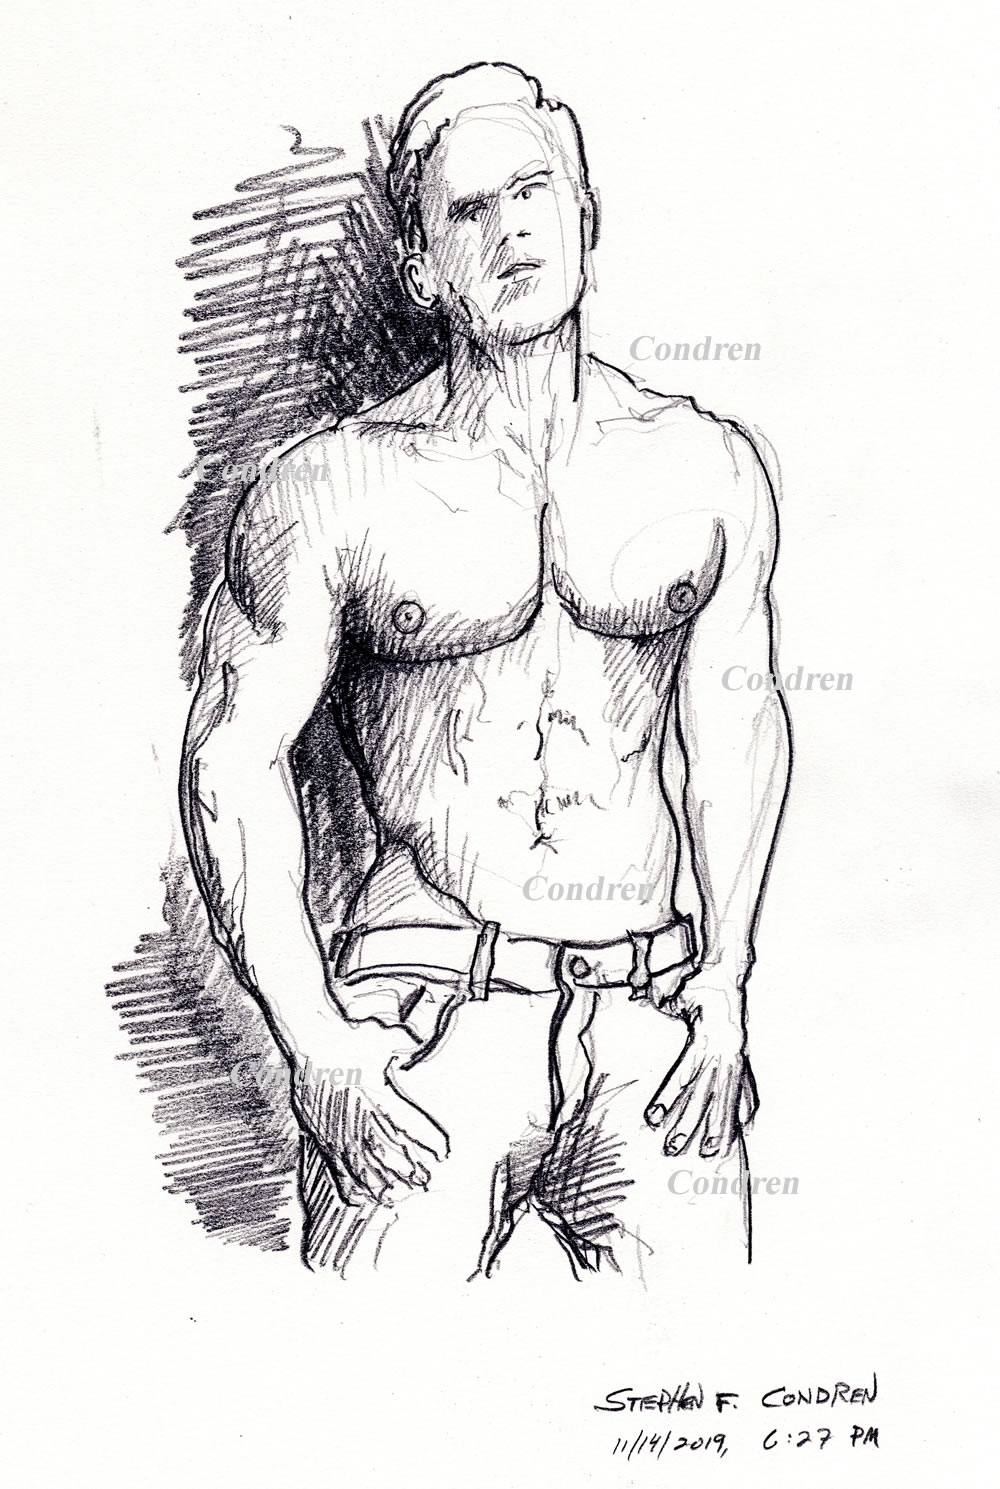 Abel Albonetti #351Z fitness model pencil figure drawing by artist Stephen F. Condren, with LGBTQ endorsed gay prints, and scans.